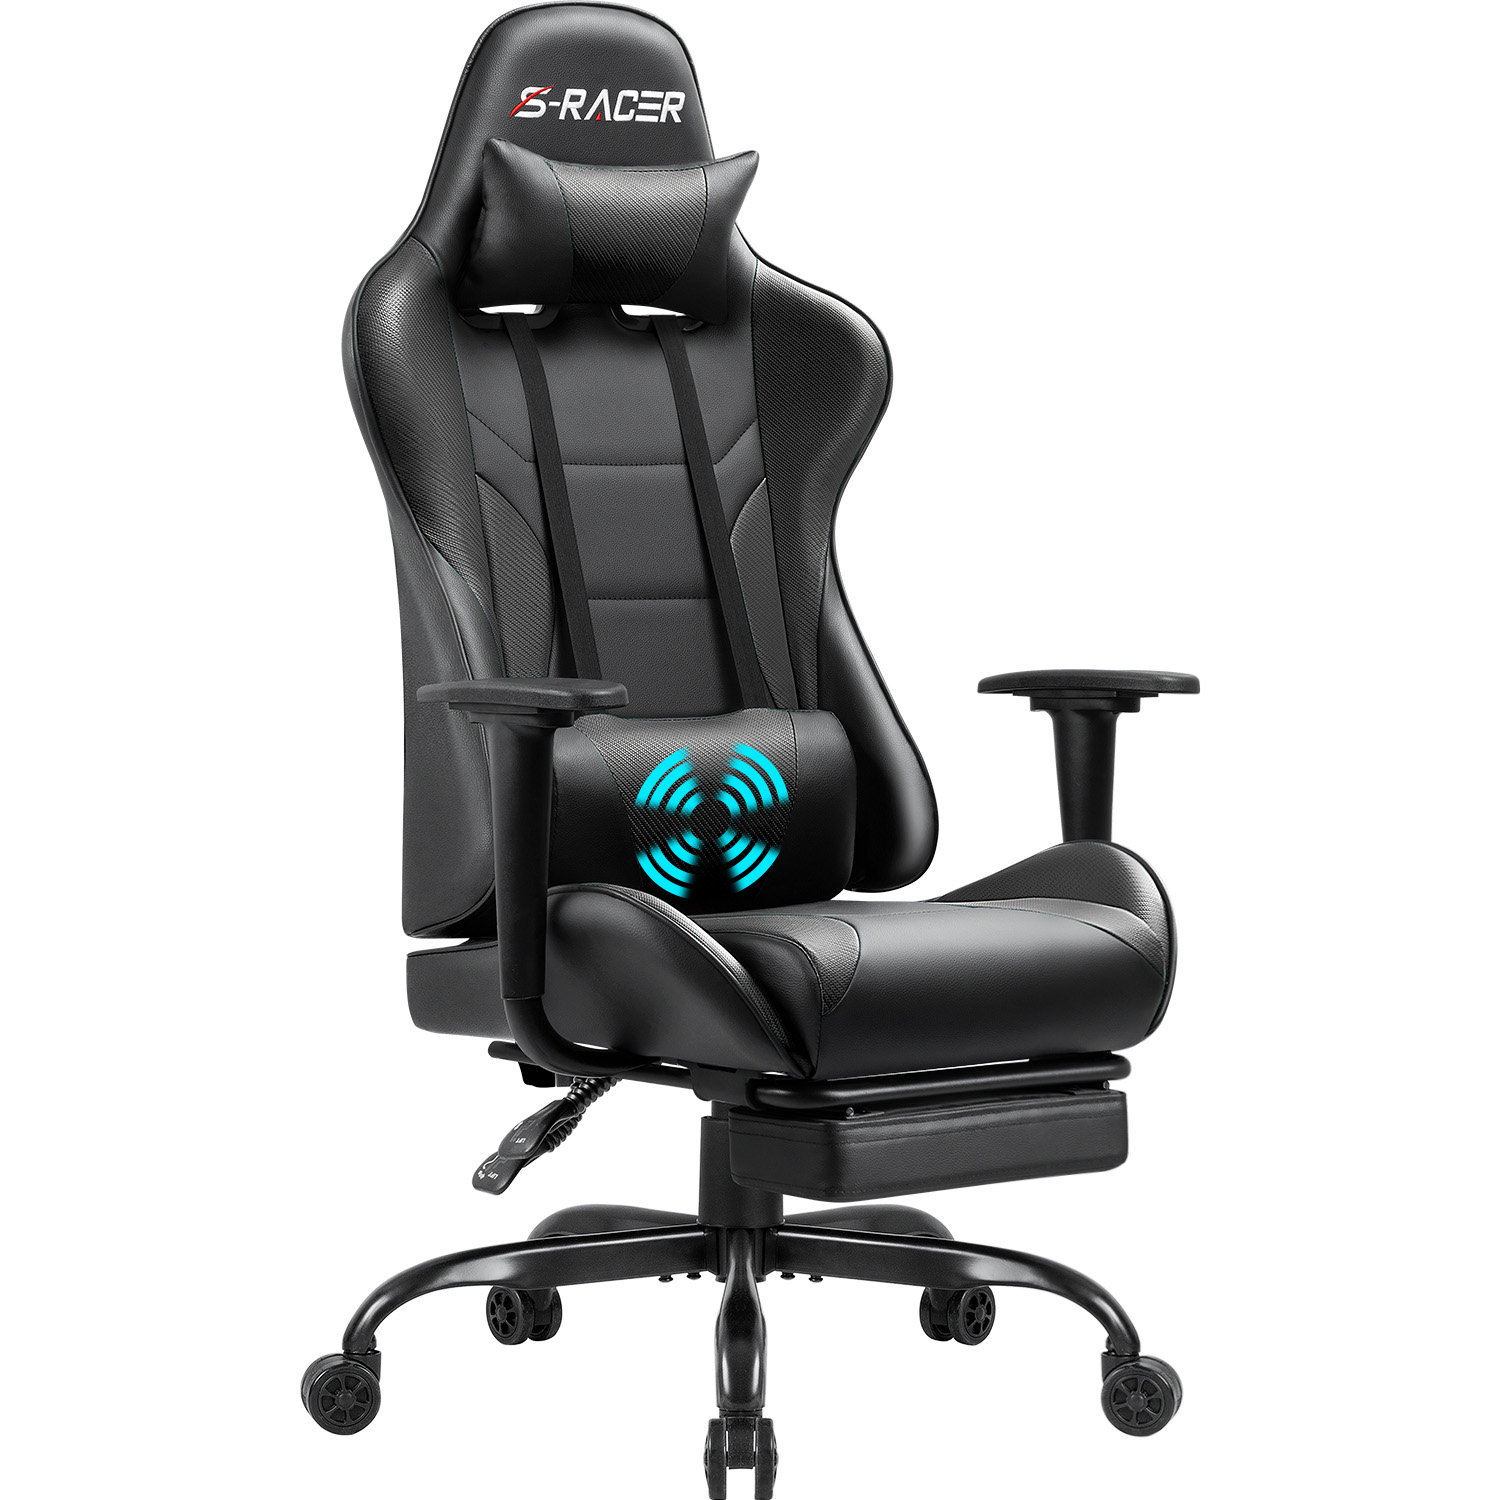 Bossin Gaming Chairs with Footrest,2022 Leather Game Chair for